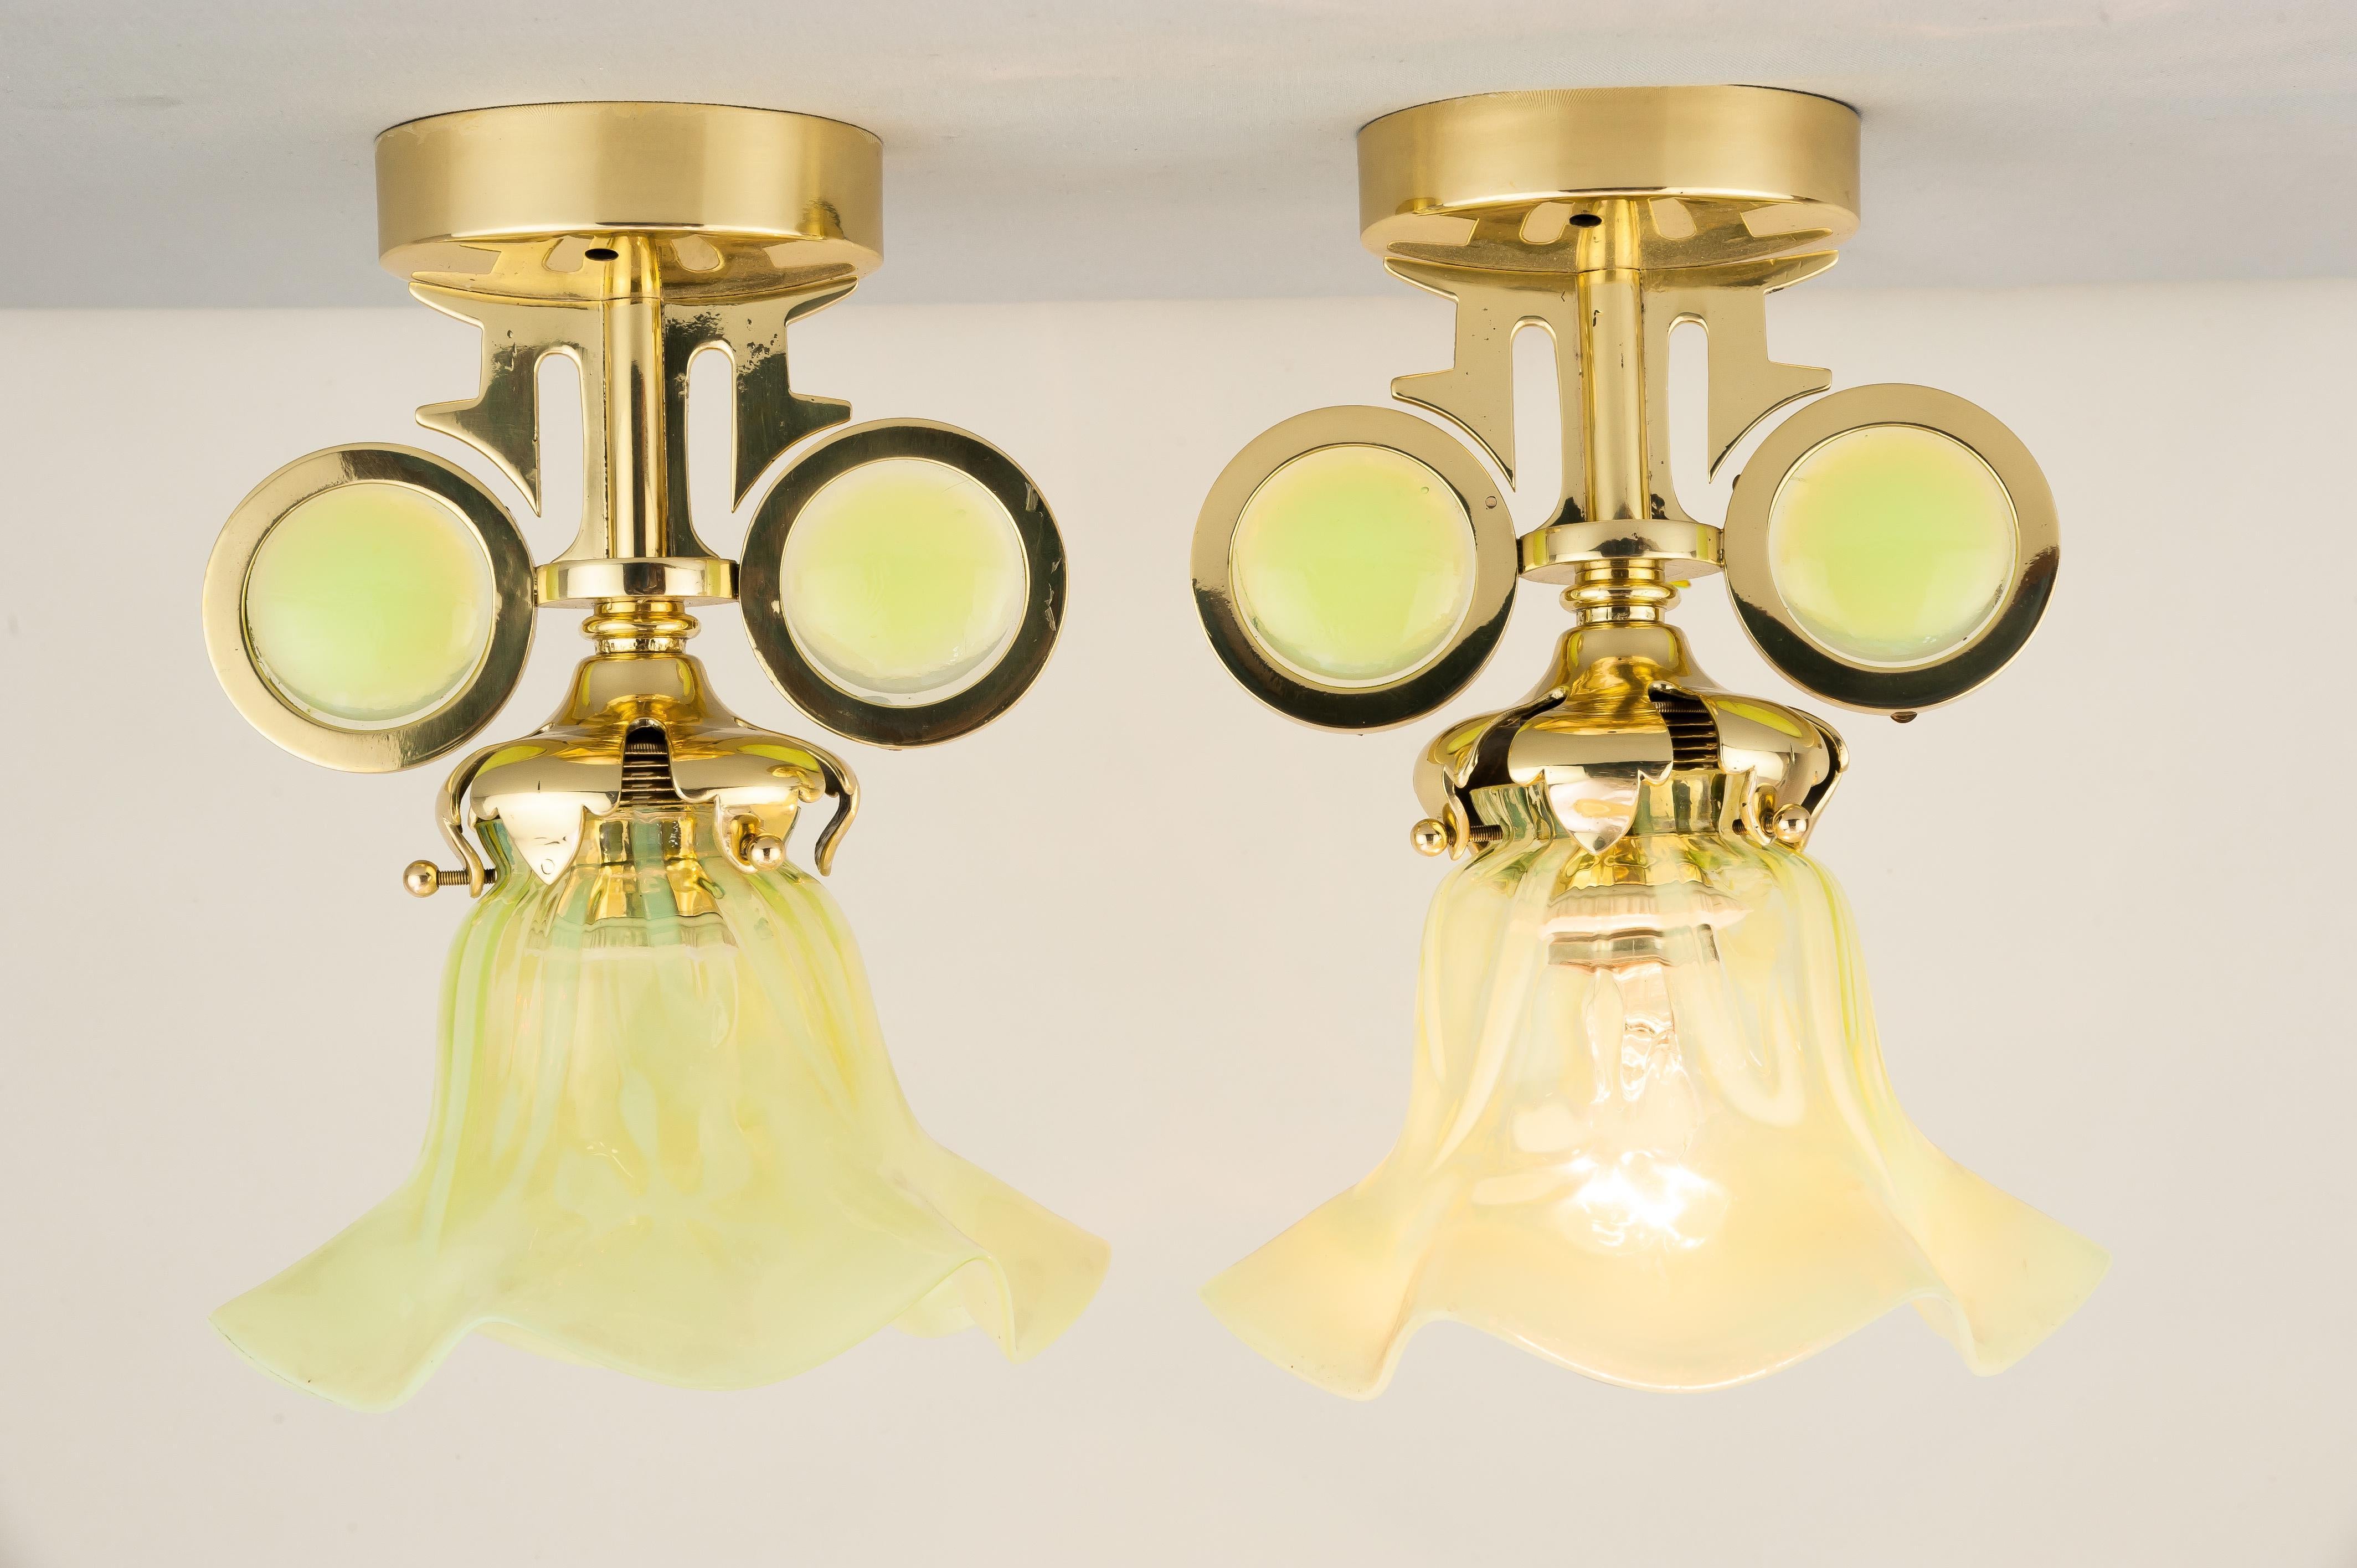 Two hanging lamps circa 1910s with original opaline glass shades
Polished and stove enameled.